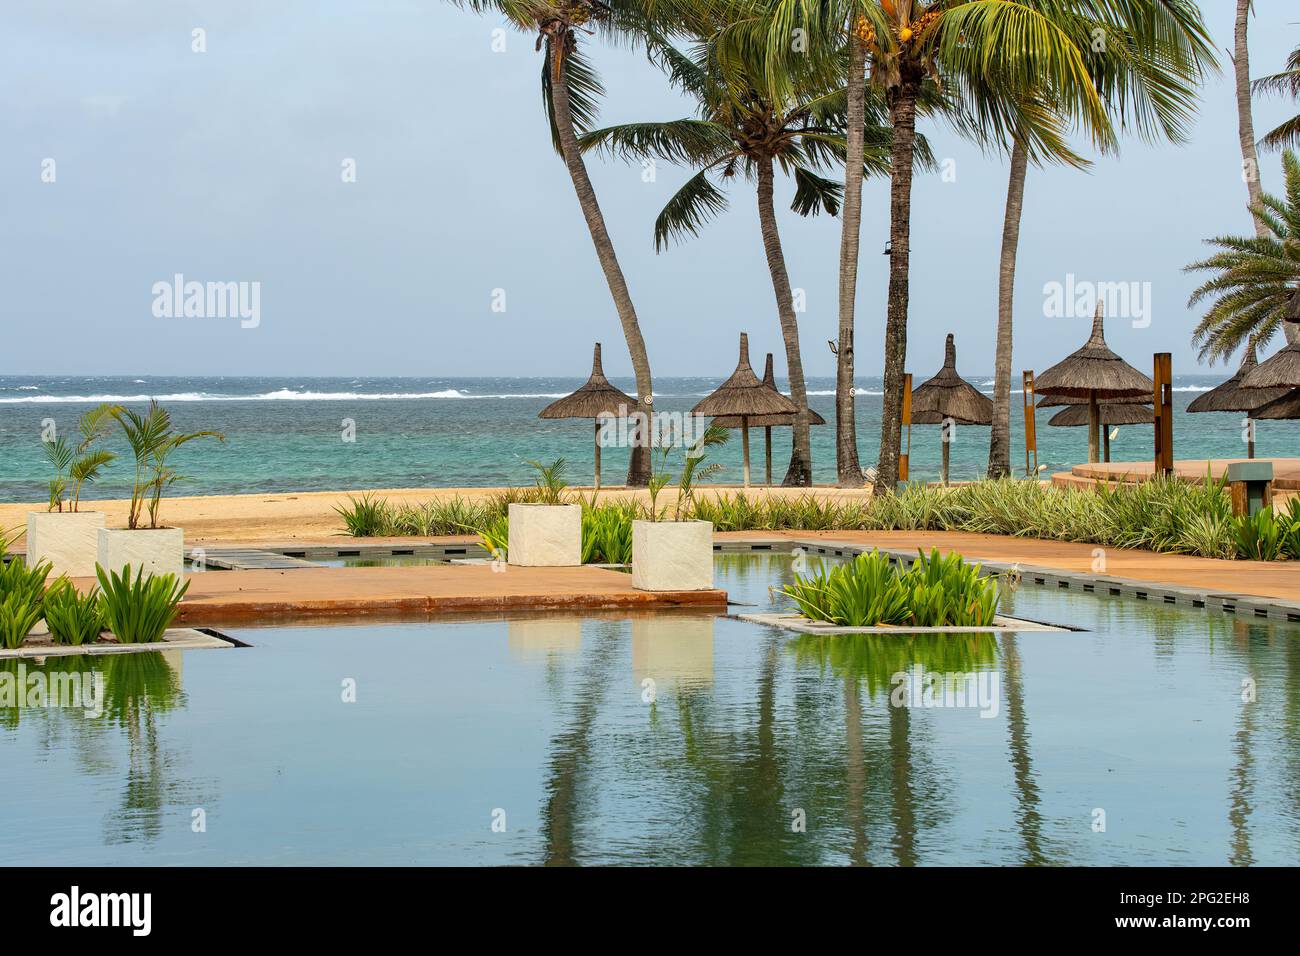 Meerblick bei Outriggers, Bel Ombre, Mauritius Stockfoto